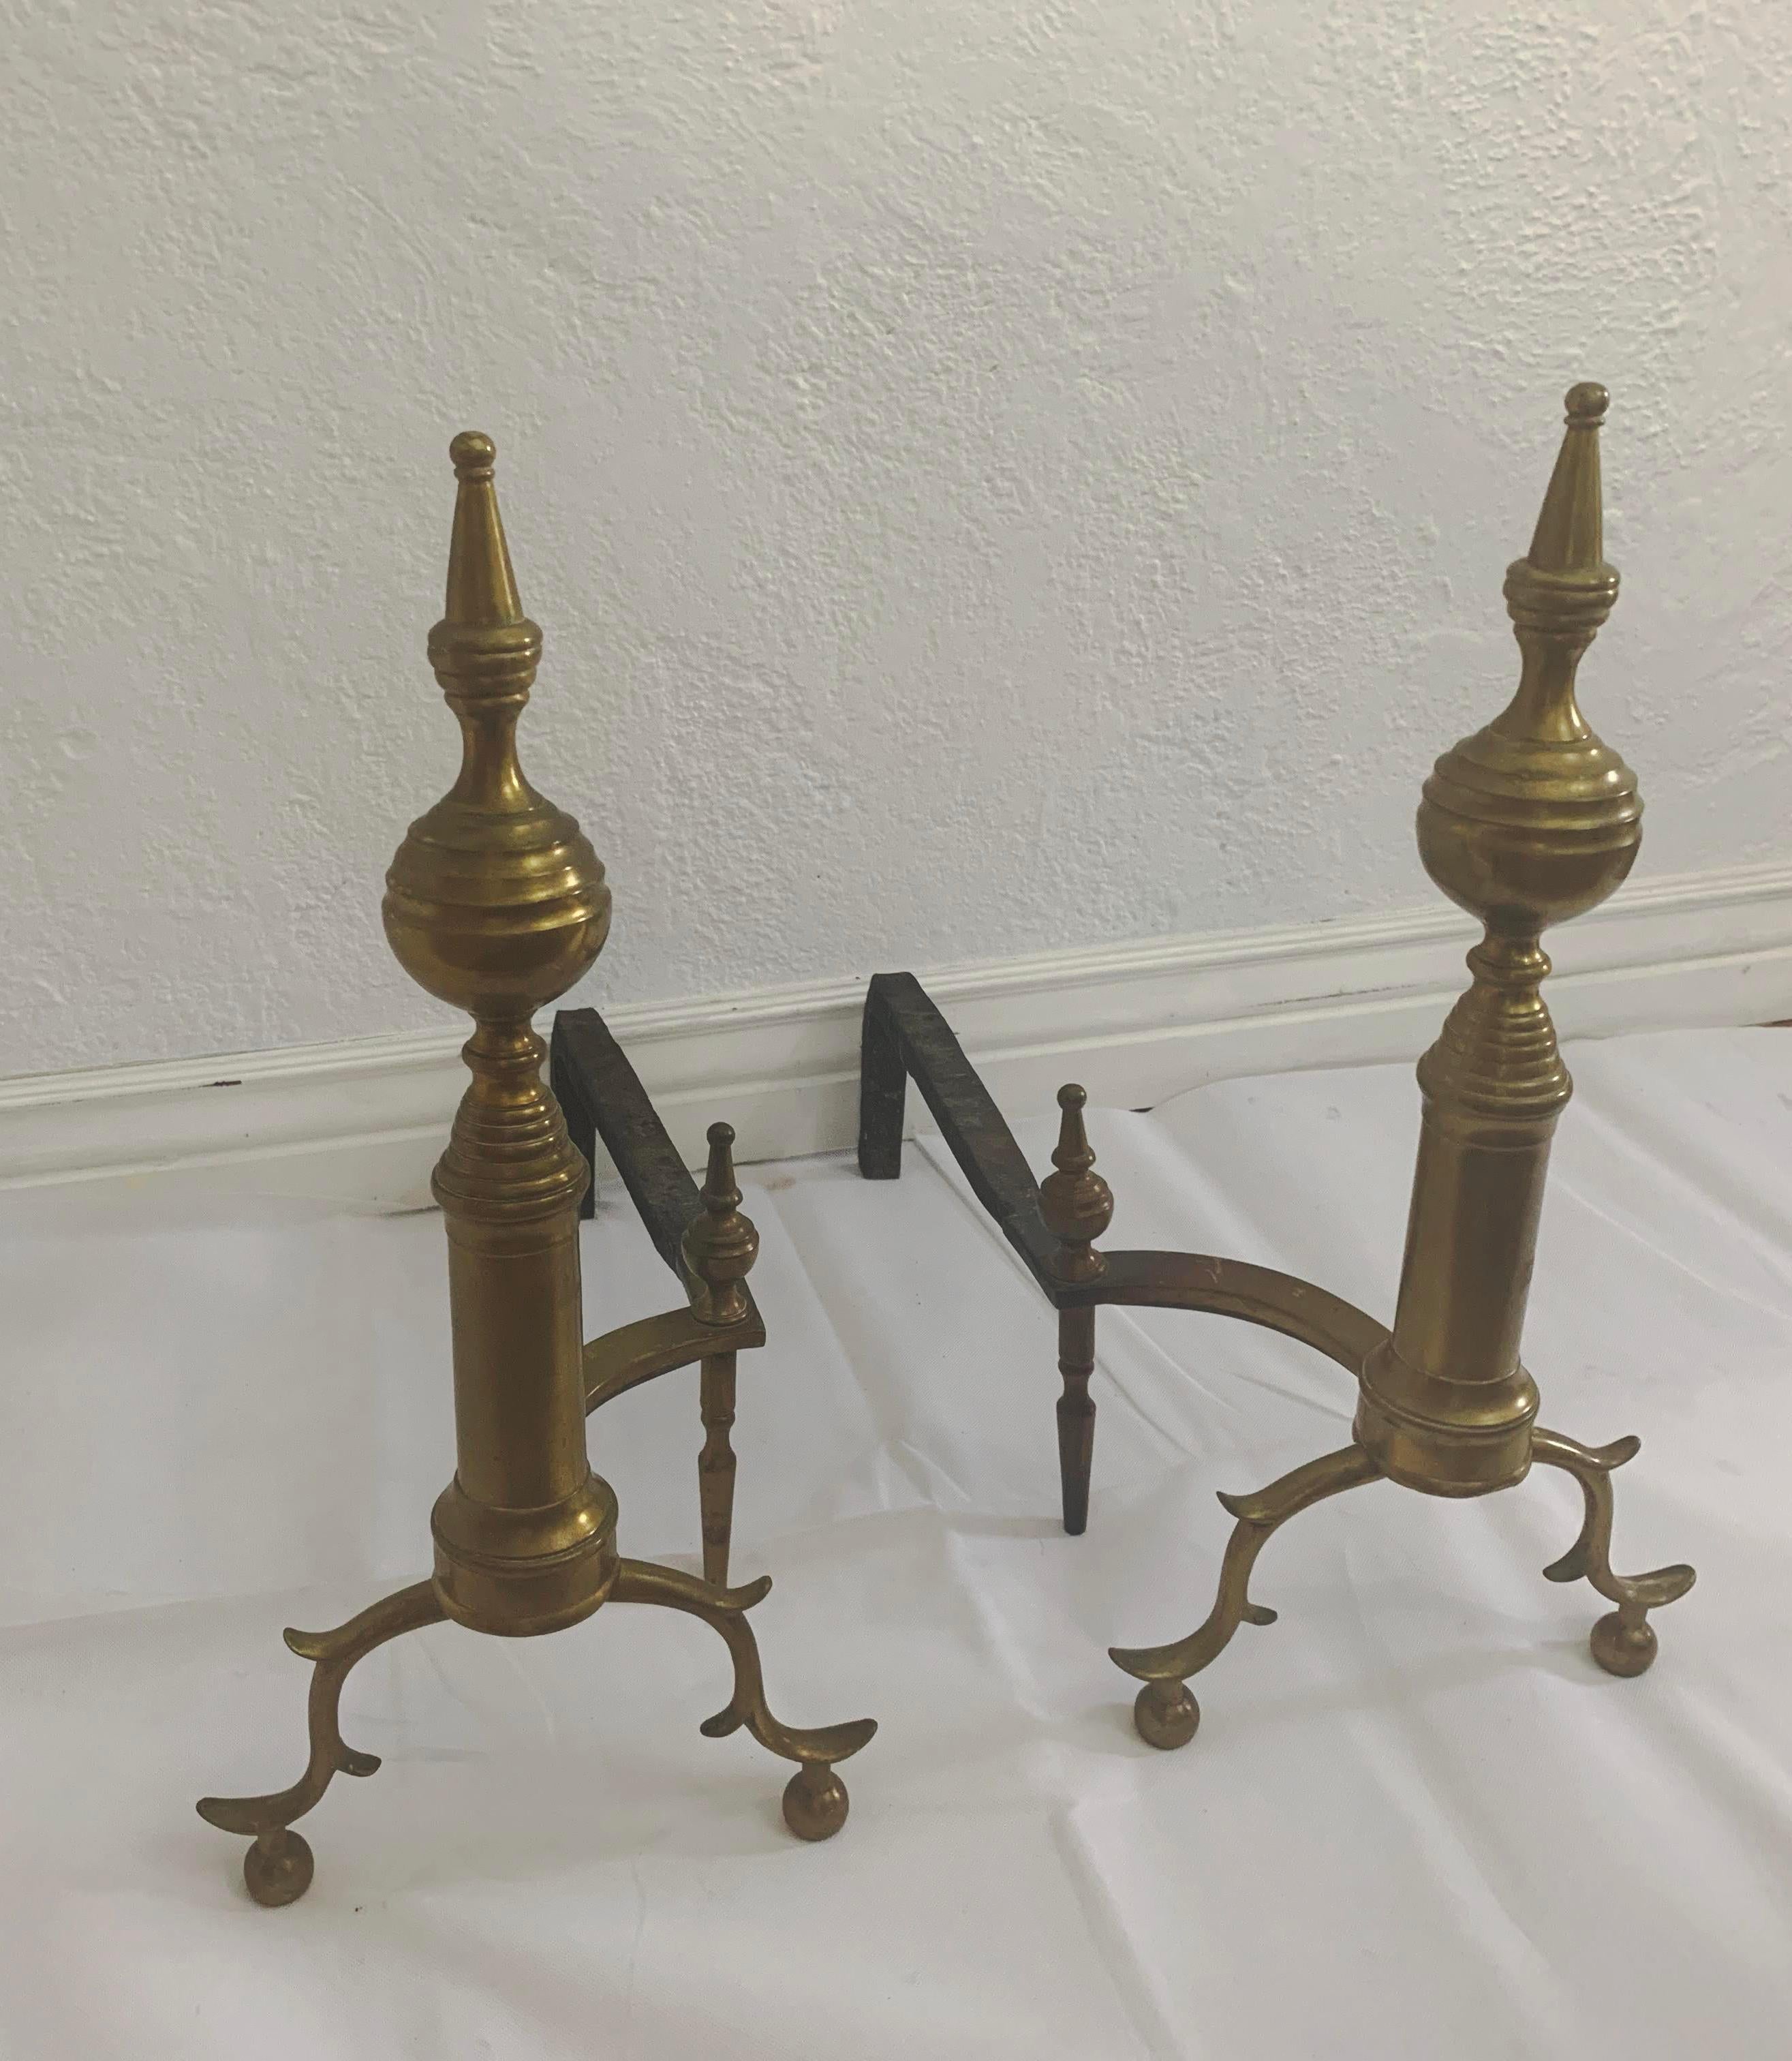 American Classical 18th Century American Brass Steeple Top Andirons - a Pair